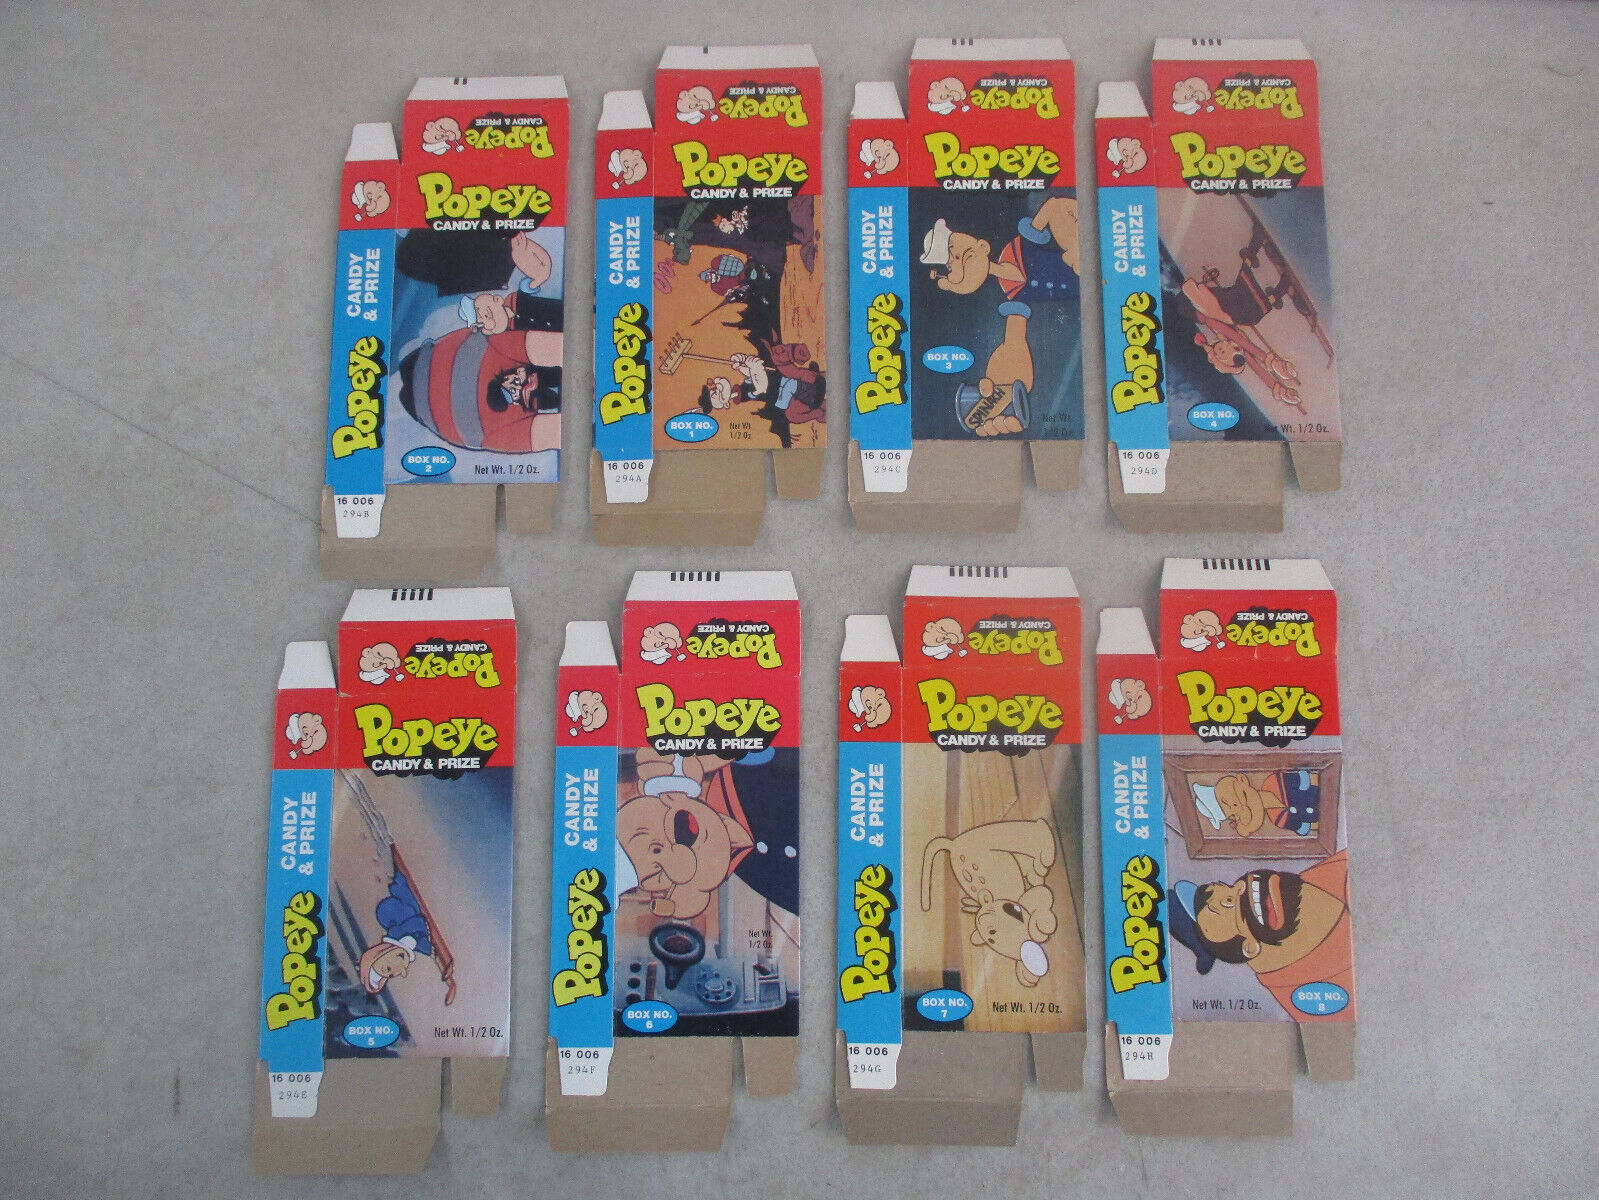 SET OF 8 VINTAGE 1979 POPEYE CANDY AND PRIZE BOX PACKAGING FLAT KING FEATURES